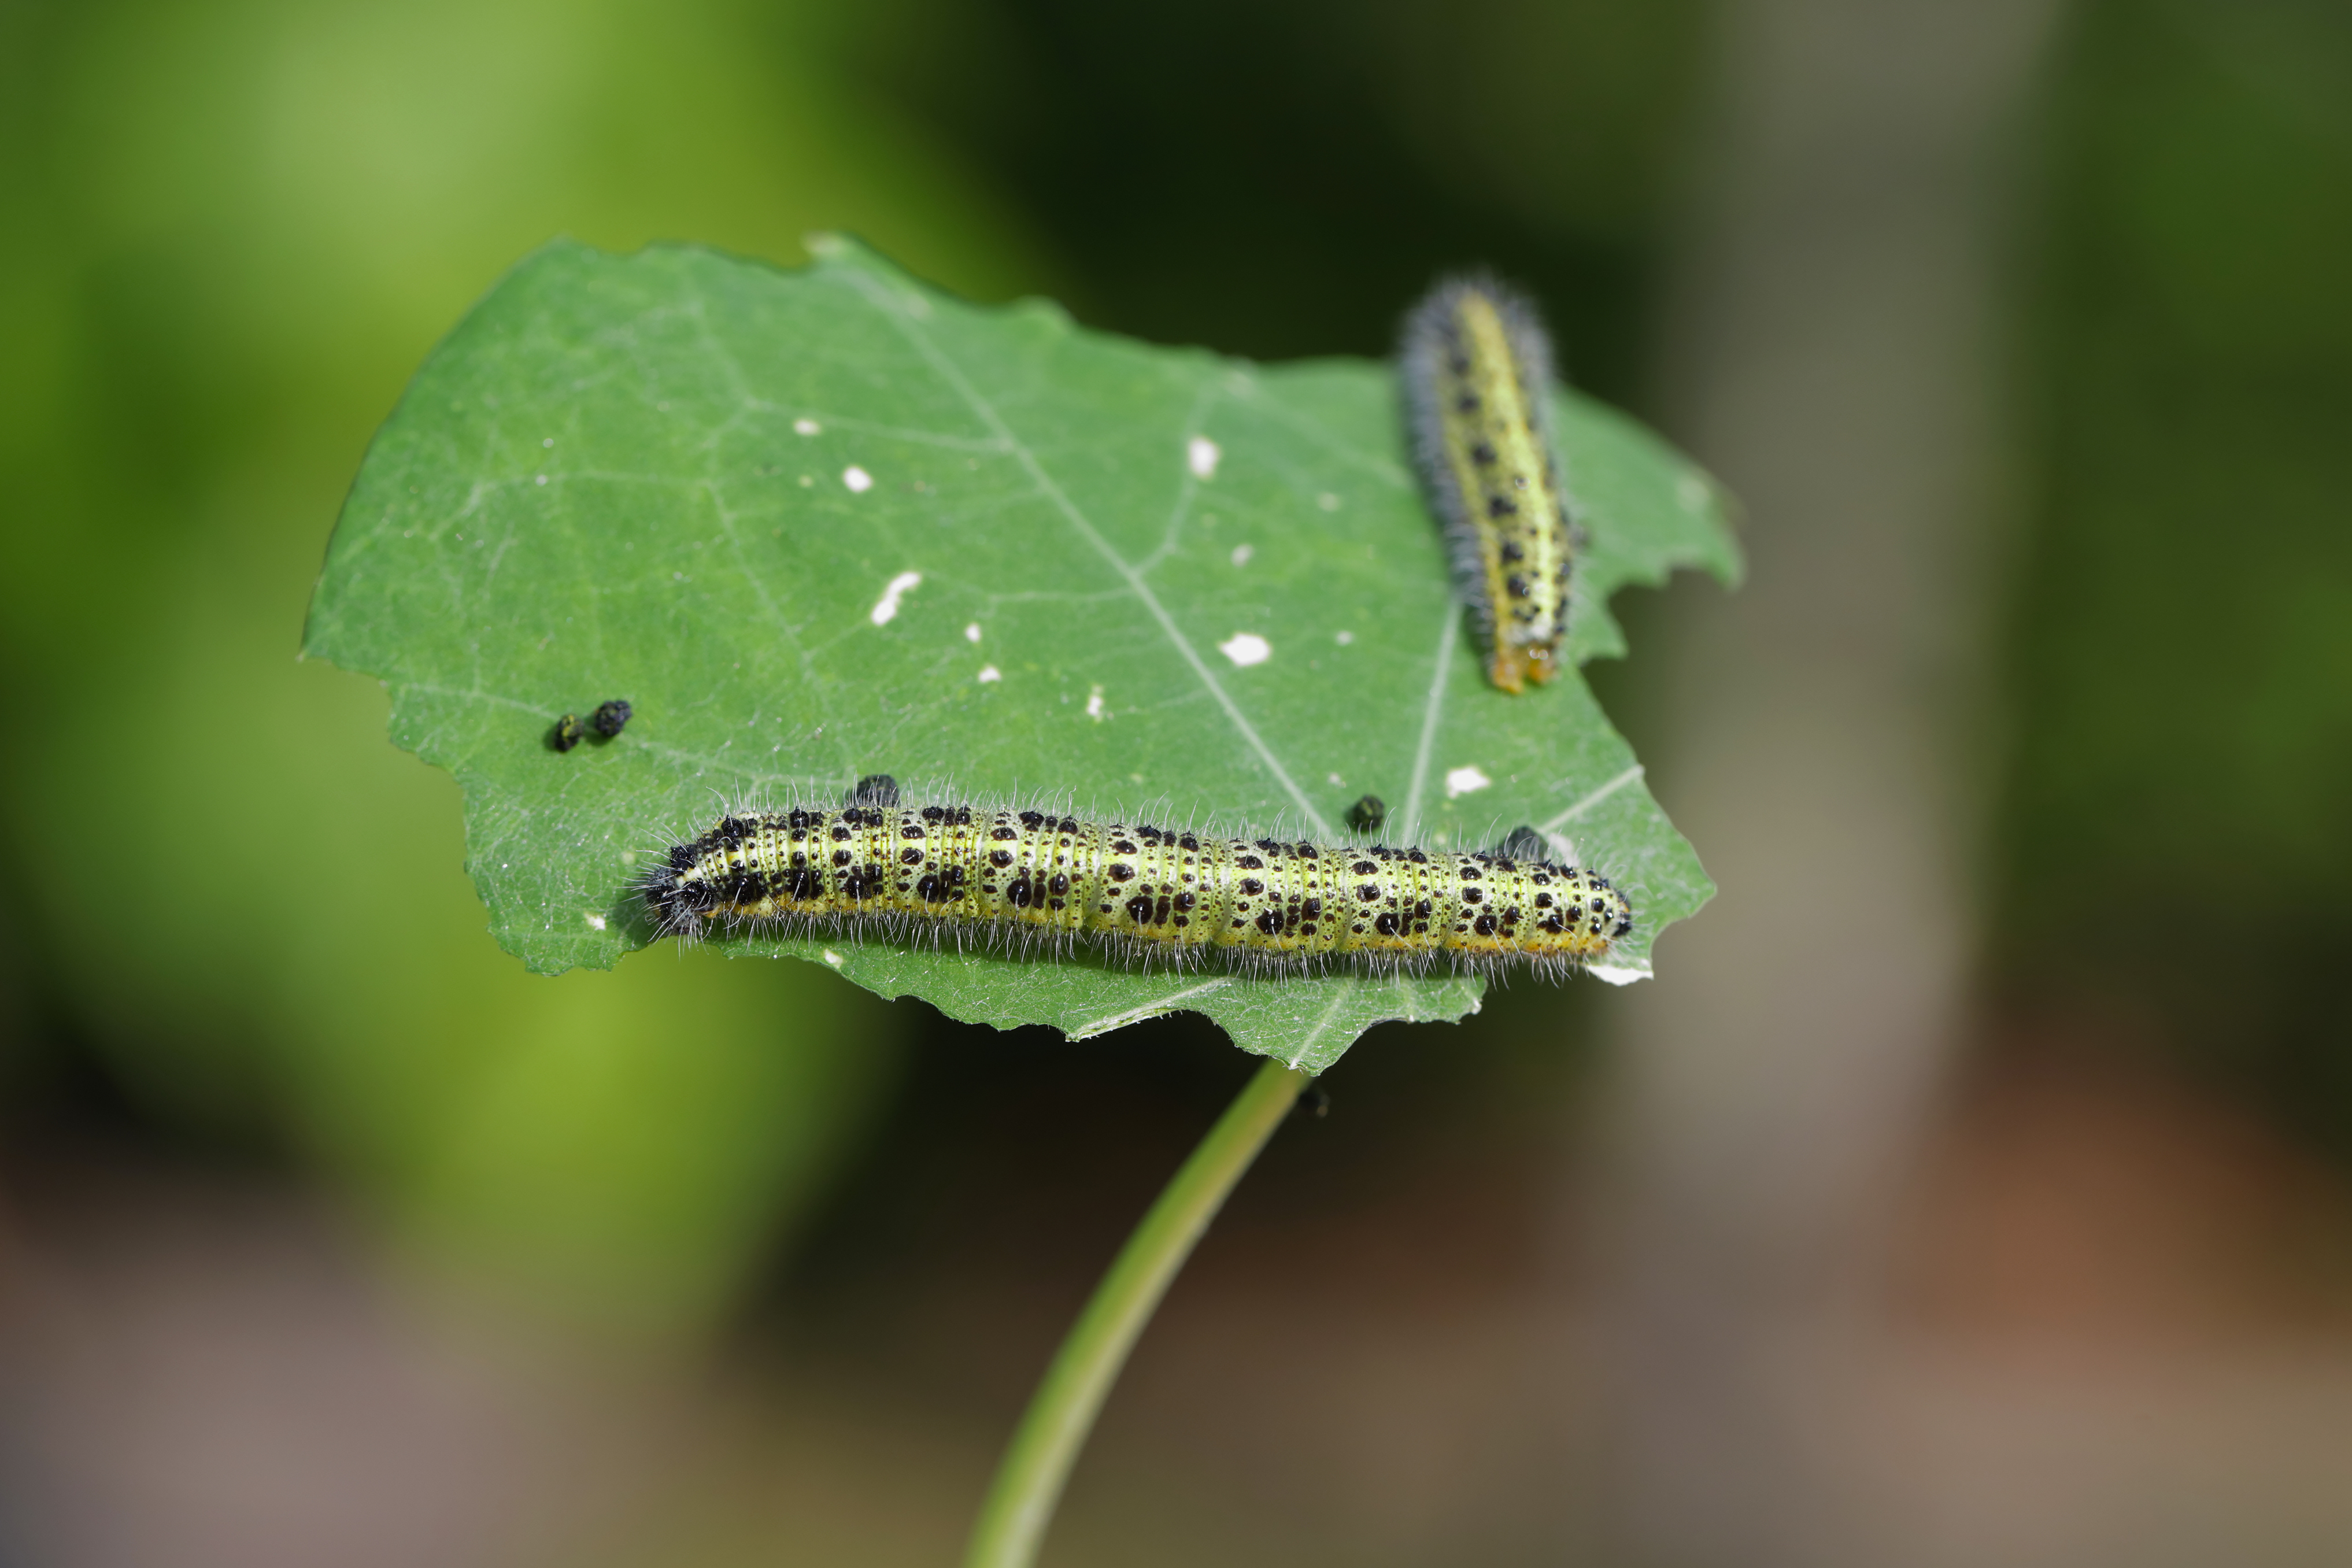 Gardening pro shares three easy ways to stop caterpillars ruining your plants